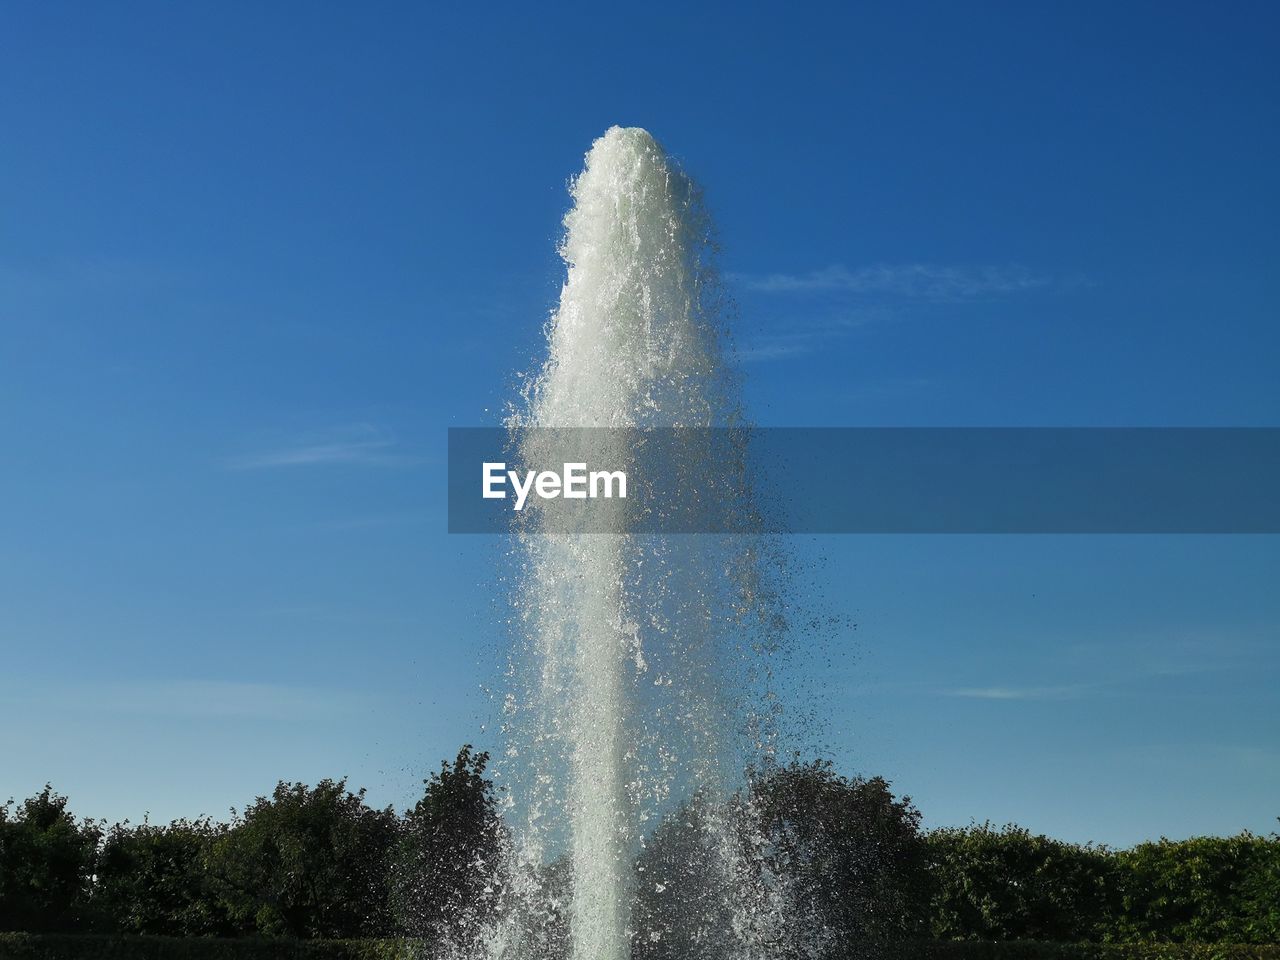 LOW ANGLE VIEW OF FOUNTAIN AGAINST BLUE SKY